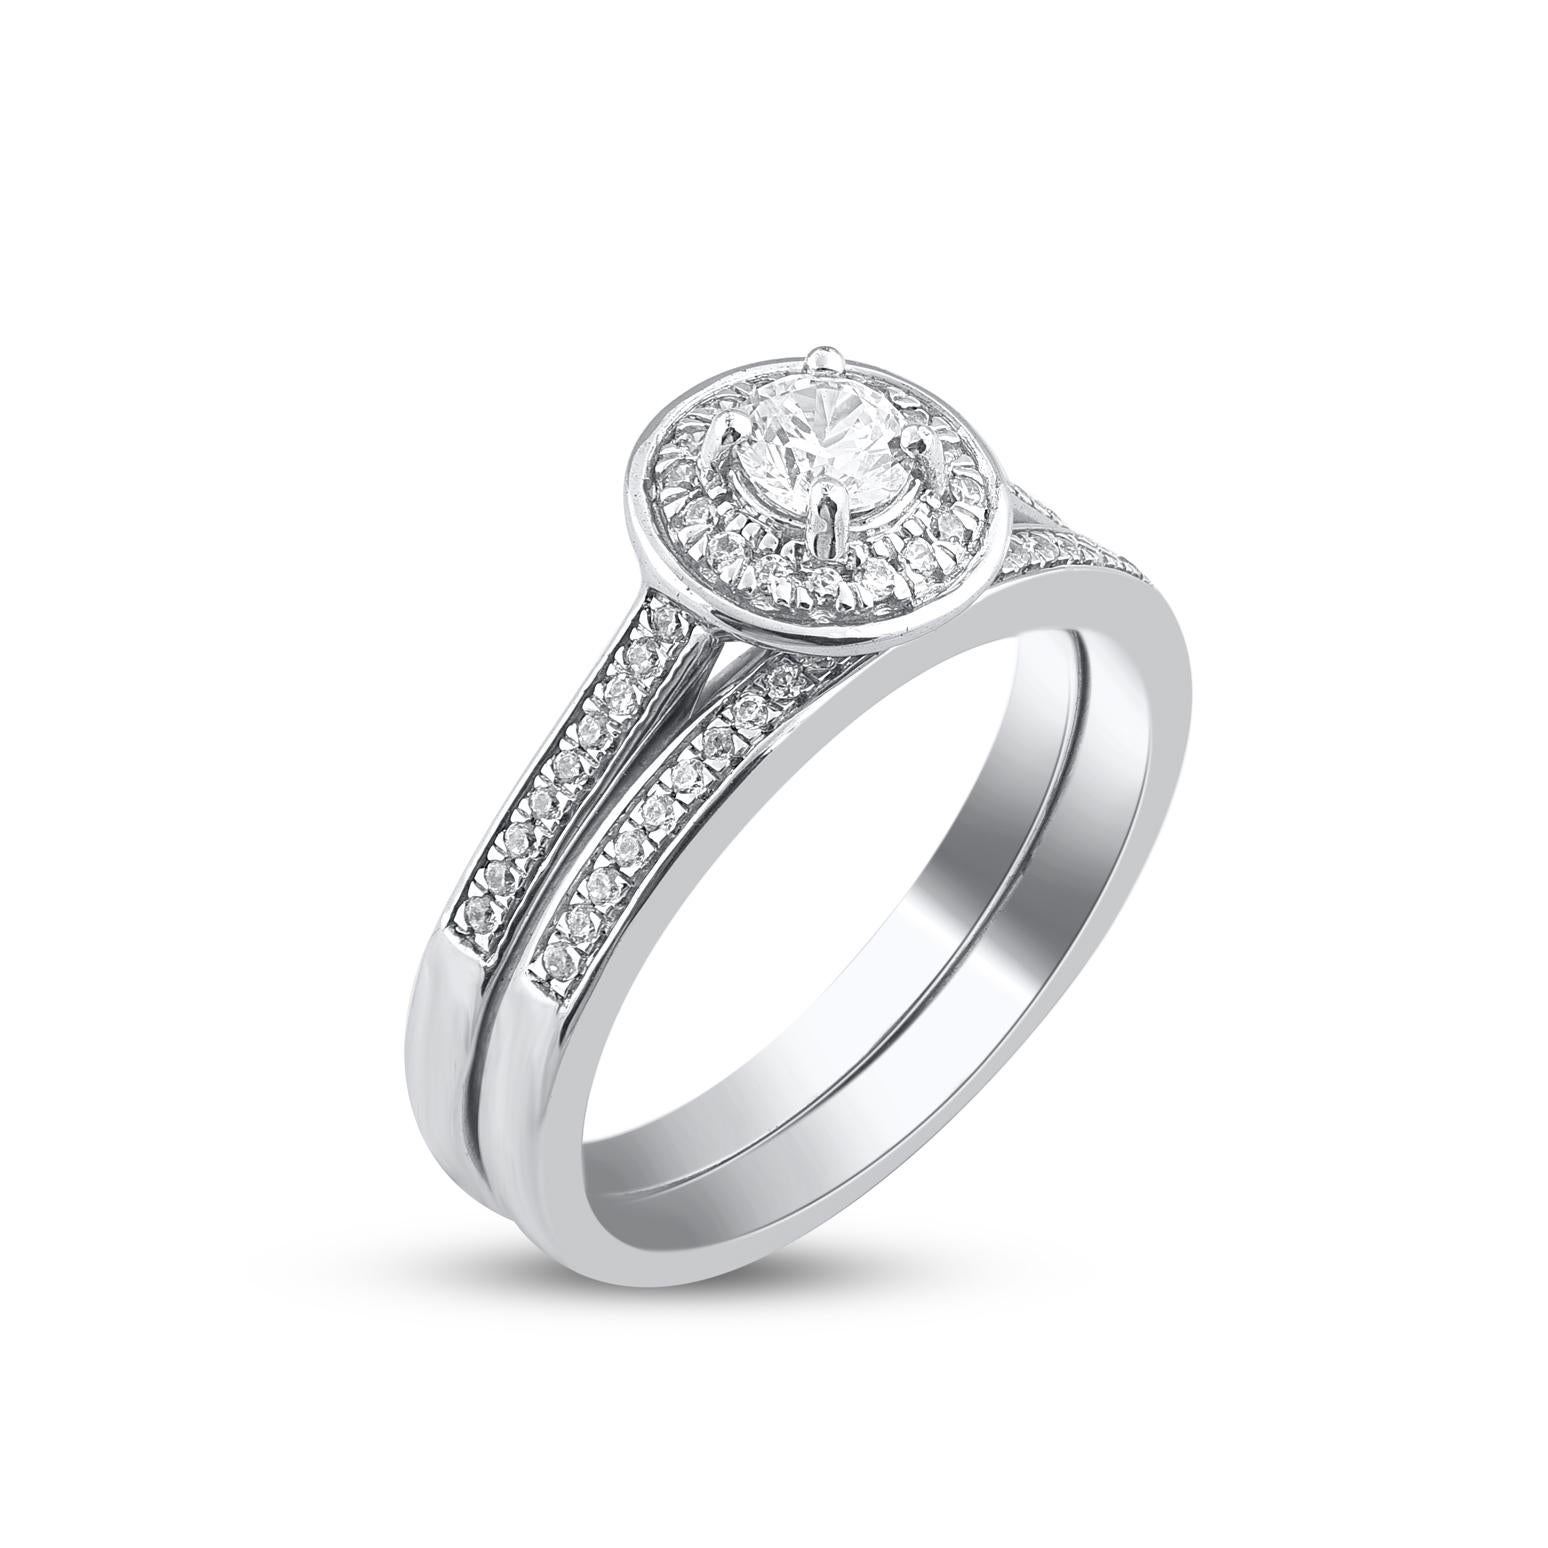 On that special day, express all your love with this classic and dazzling diamond bridal set. Crafted in 14 Karat white gold. This wedding ring features a sparkling 58 brilliant cut and single cut round diamonds beautifully set in prong & pave